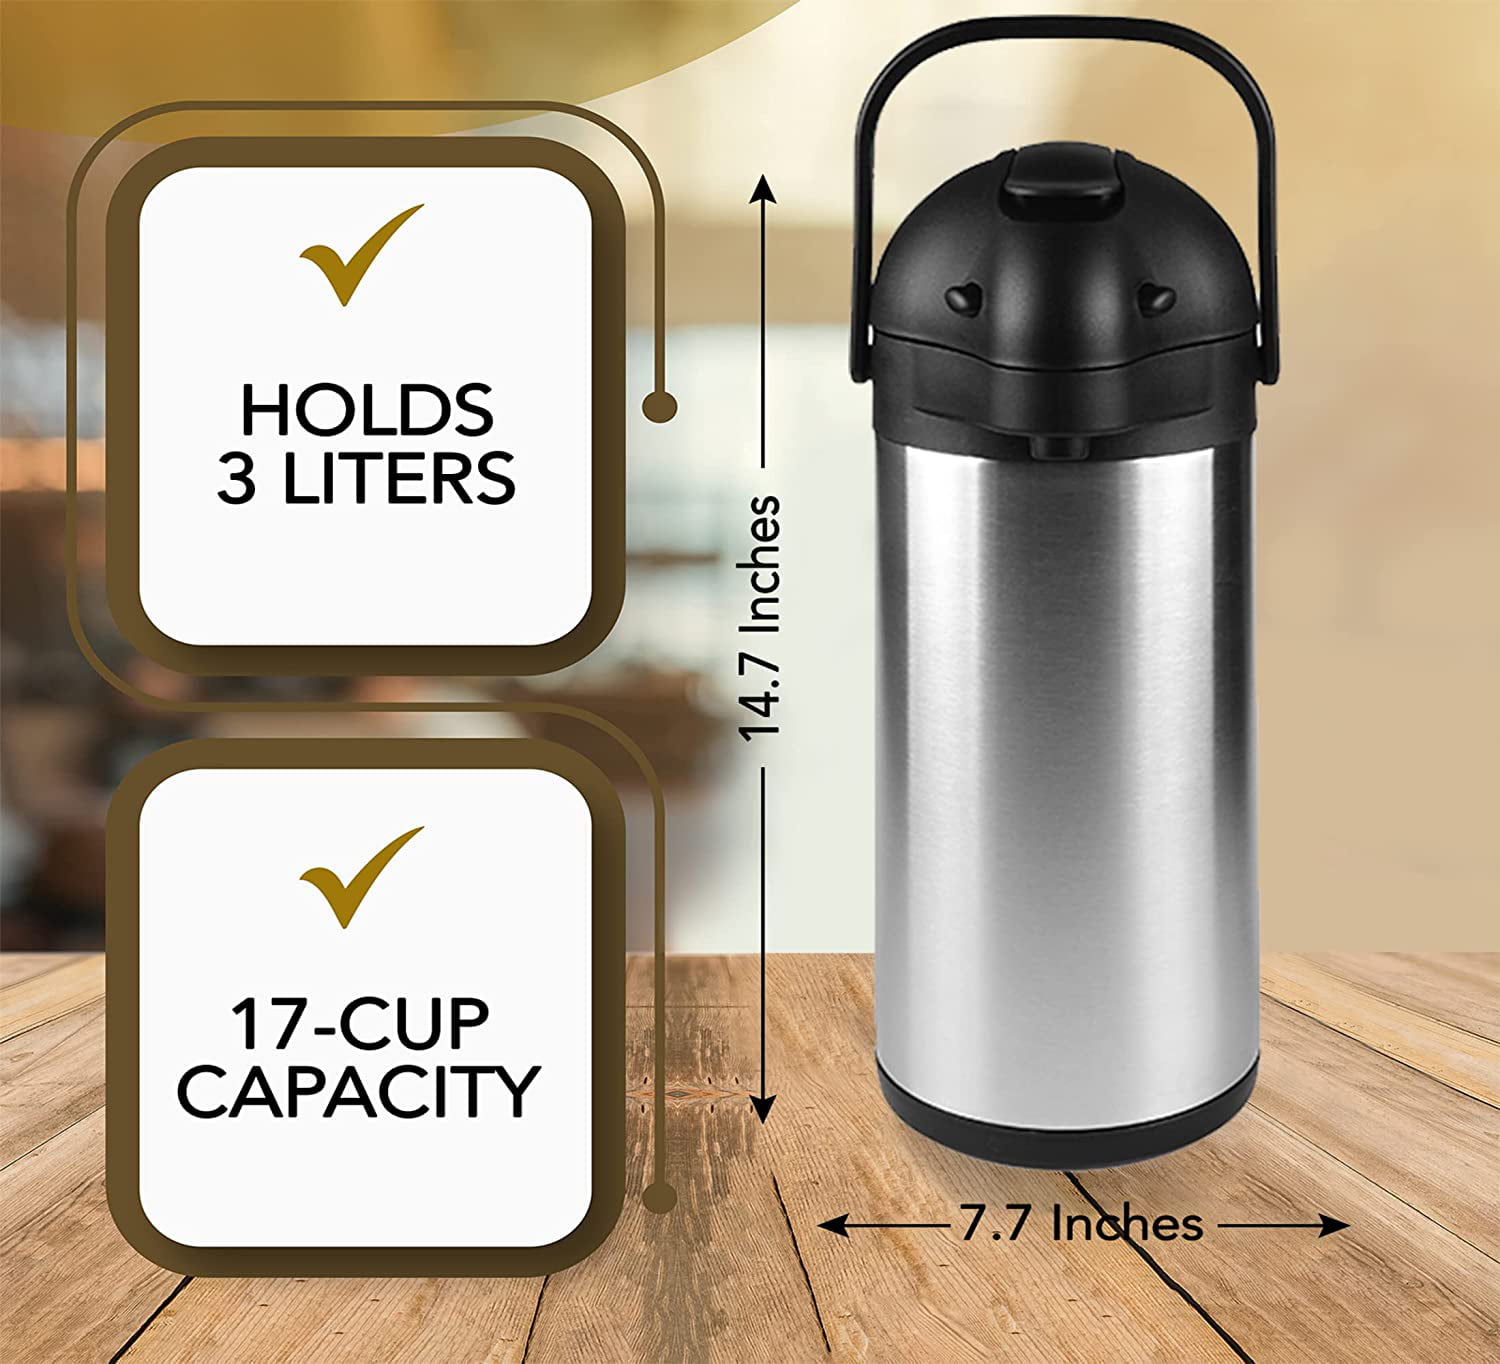 Heritage66 Stainless Steel Thermal Coffee Carafe Airpot-Large Beverage  Dispenser Triple Wall Thermos Vacuum insulated Keeping Hot Coffee for 10  hours